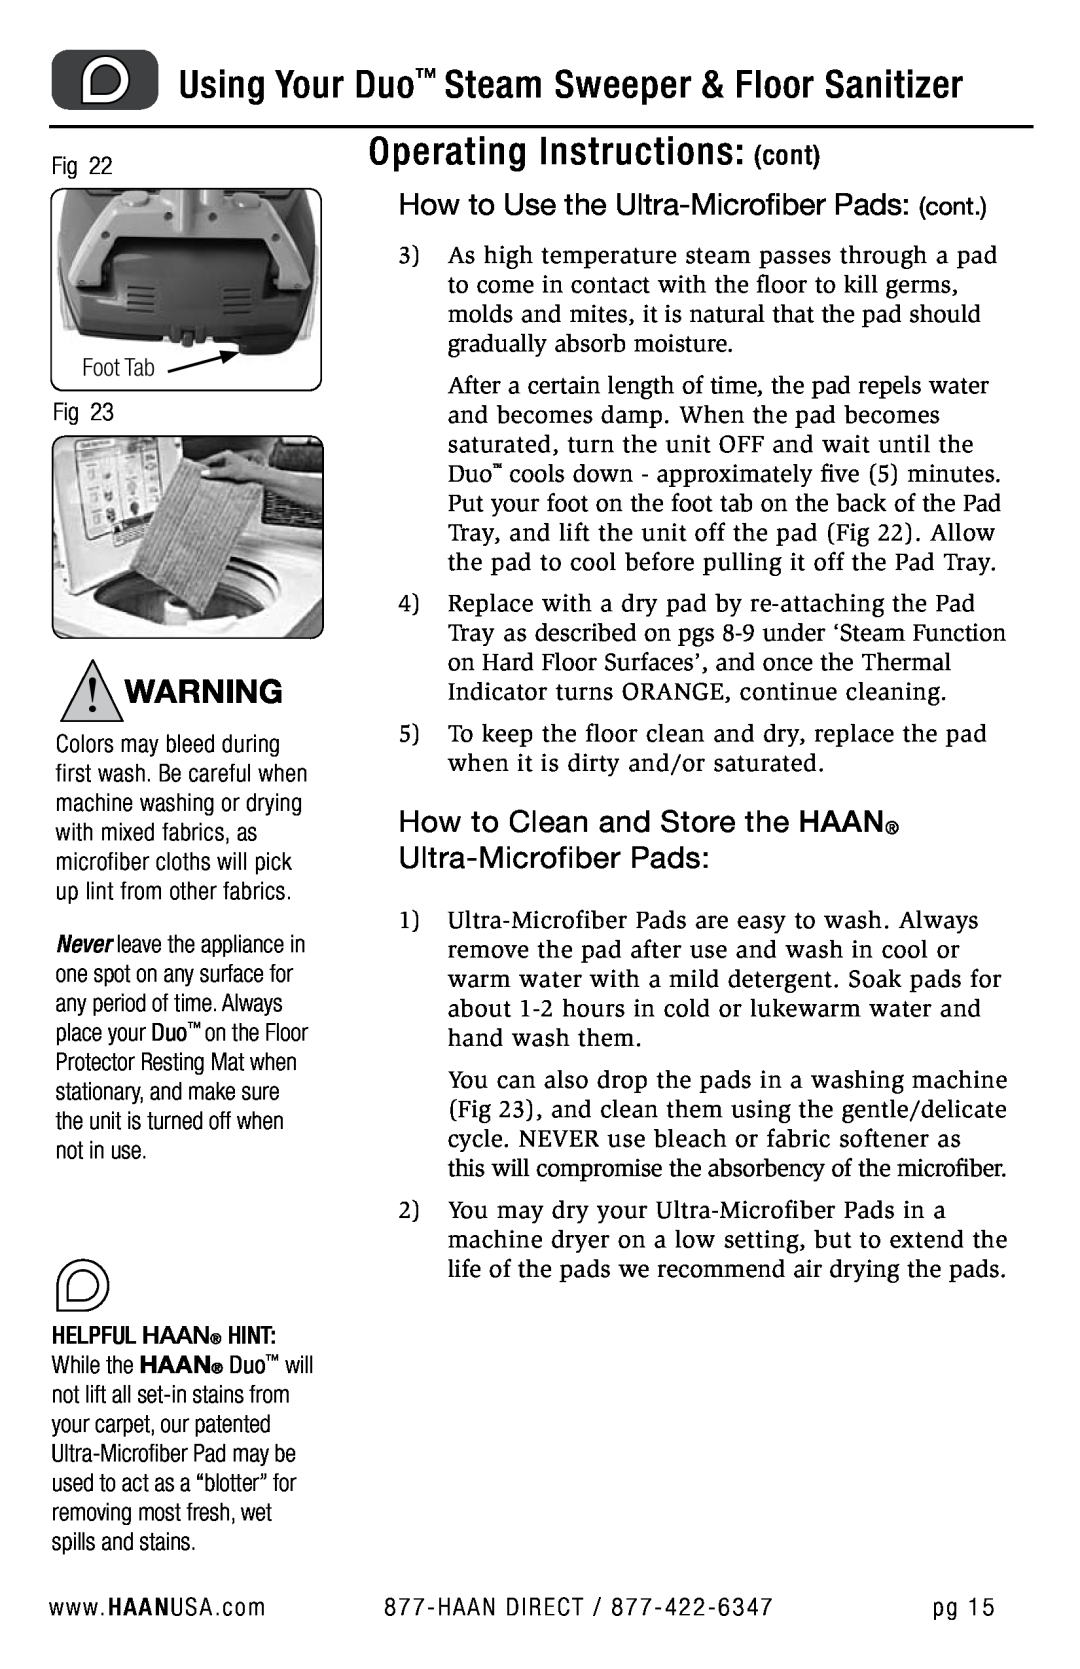 Haan HD-50 user manual Using Your Duo Steam Sweeper & Floor Sanitizer, Operating Instructions cont 